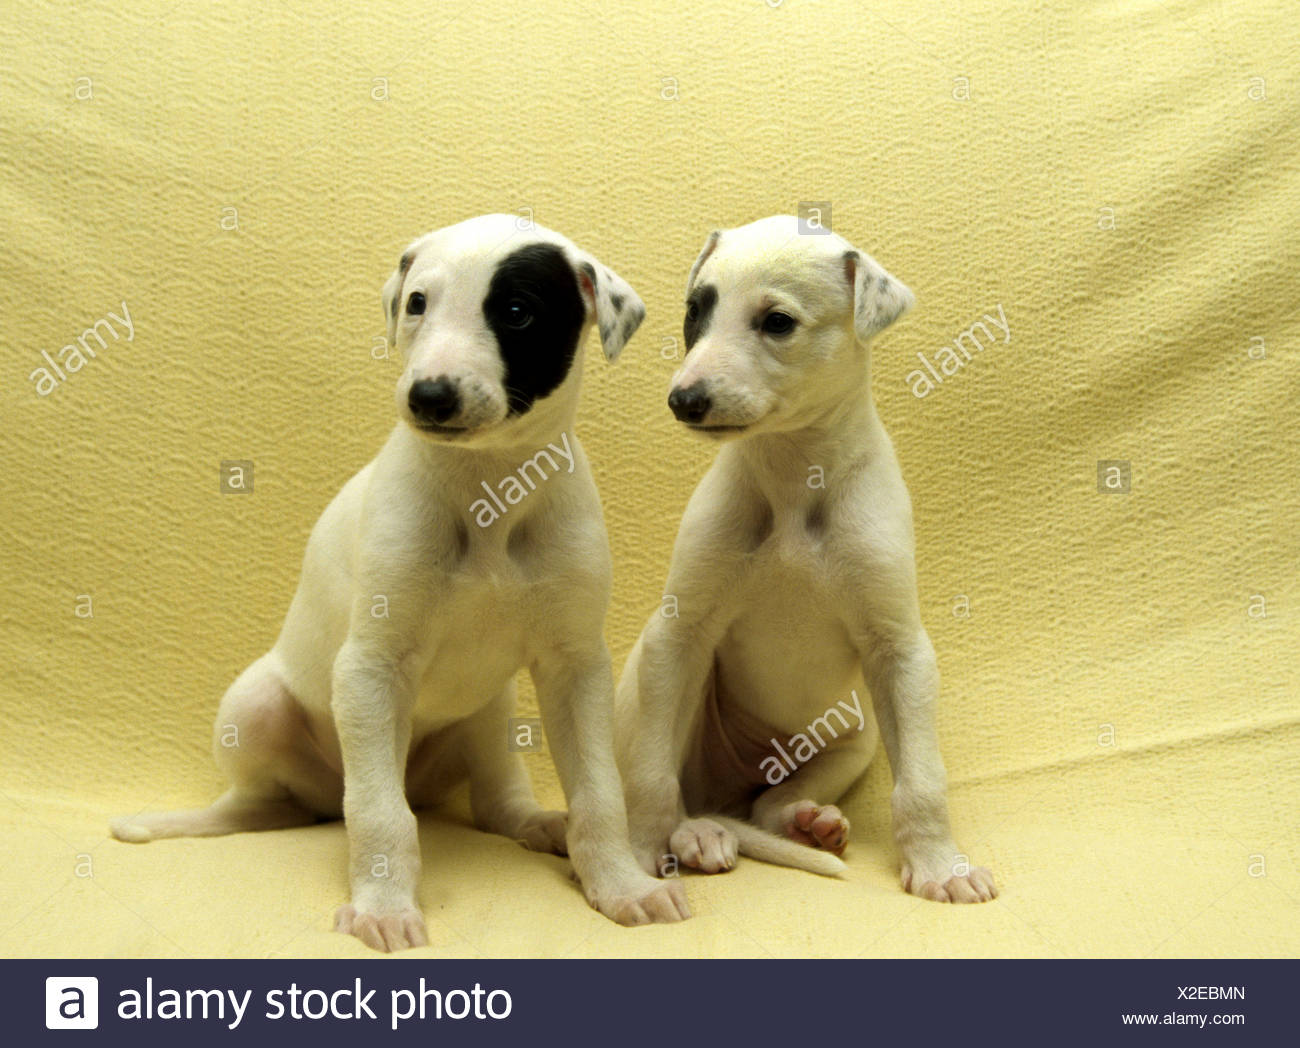 Two Greyhound Puppies Sitting On A Couch Stock Photo Alamy